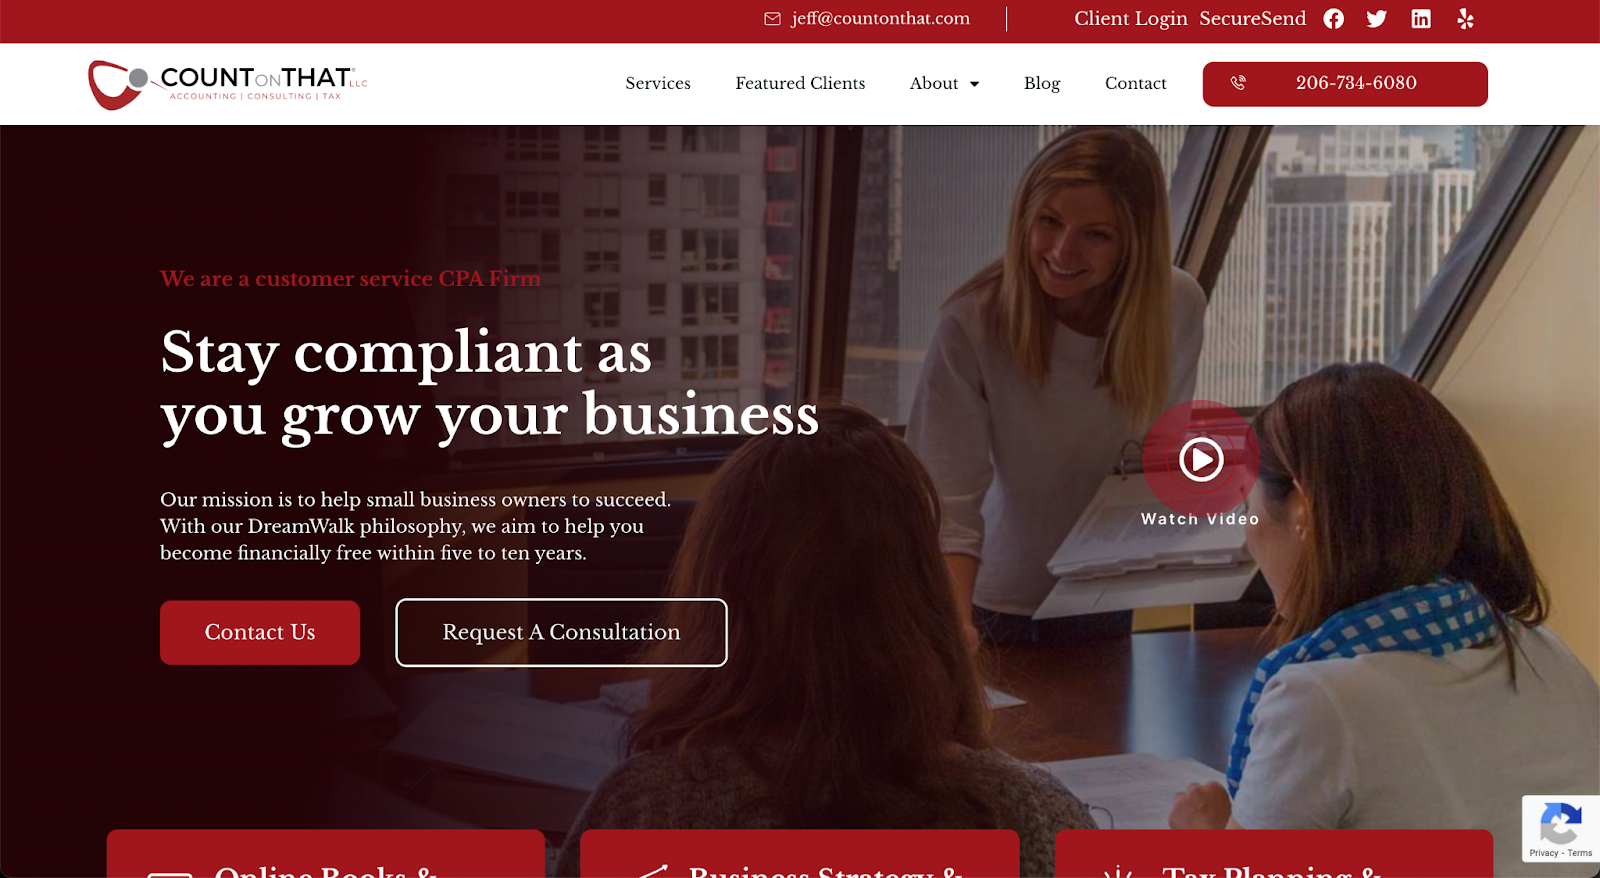 Take a look at the Count on That Website for accounting firm Website inspiration